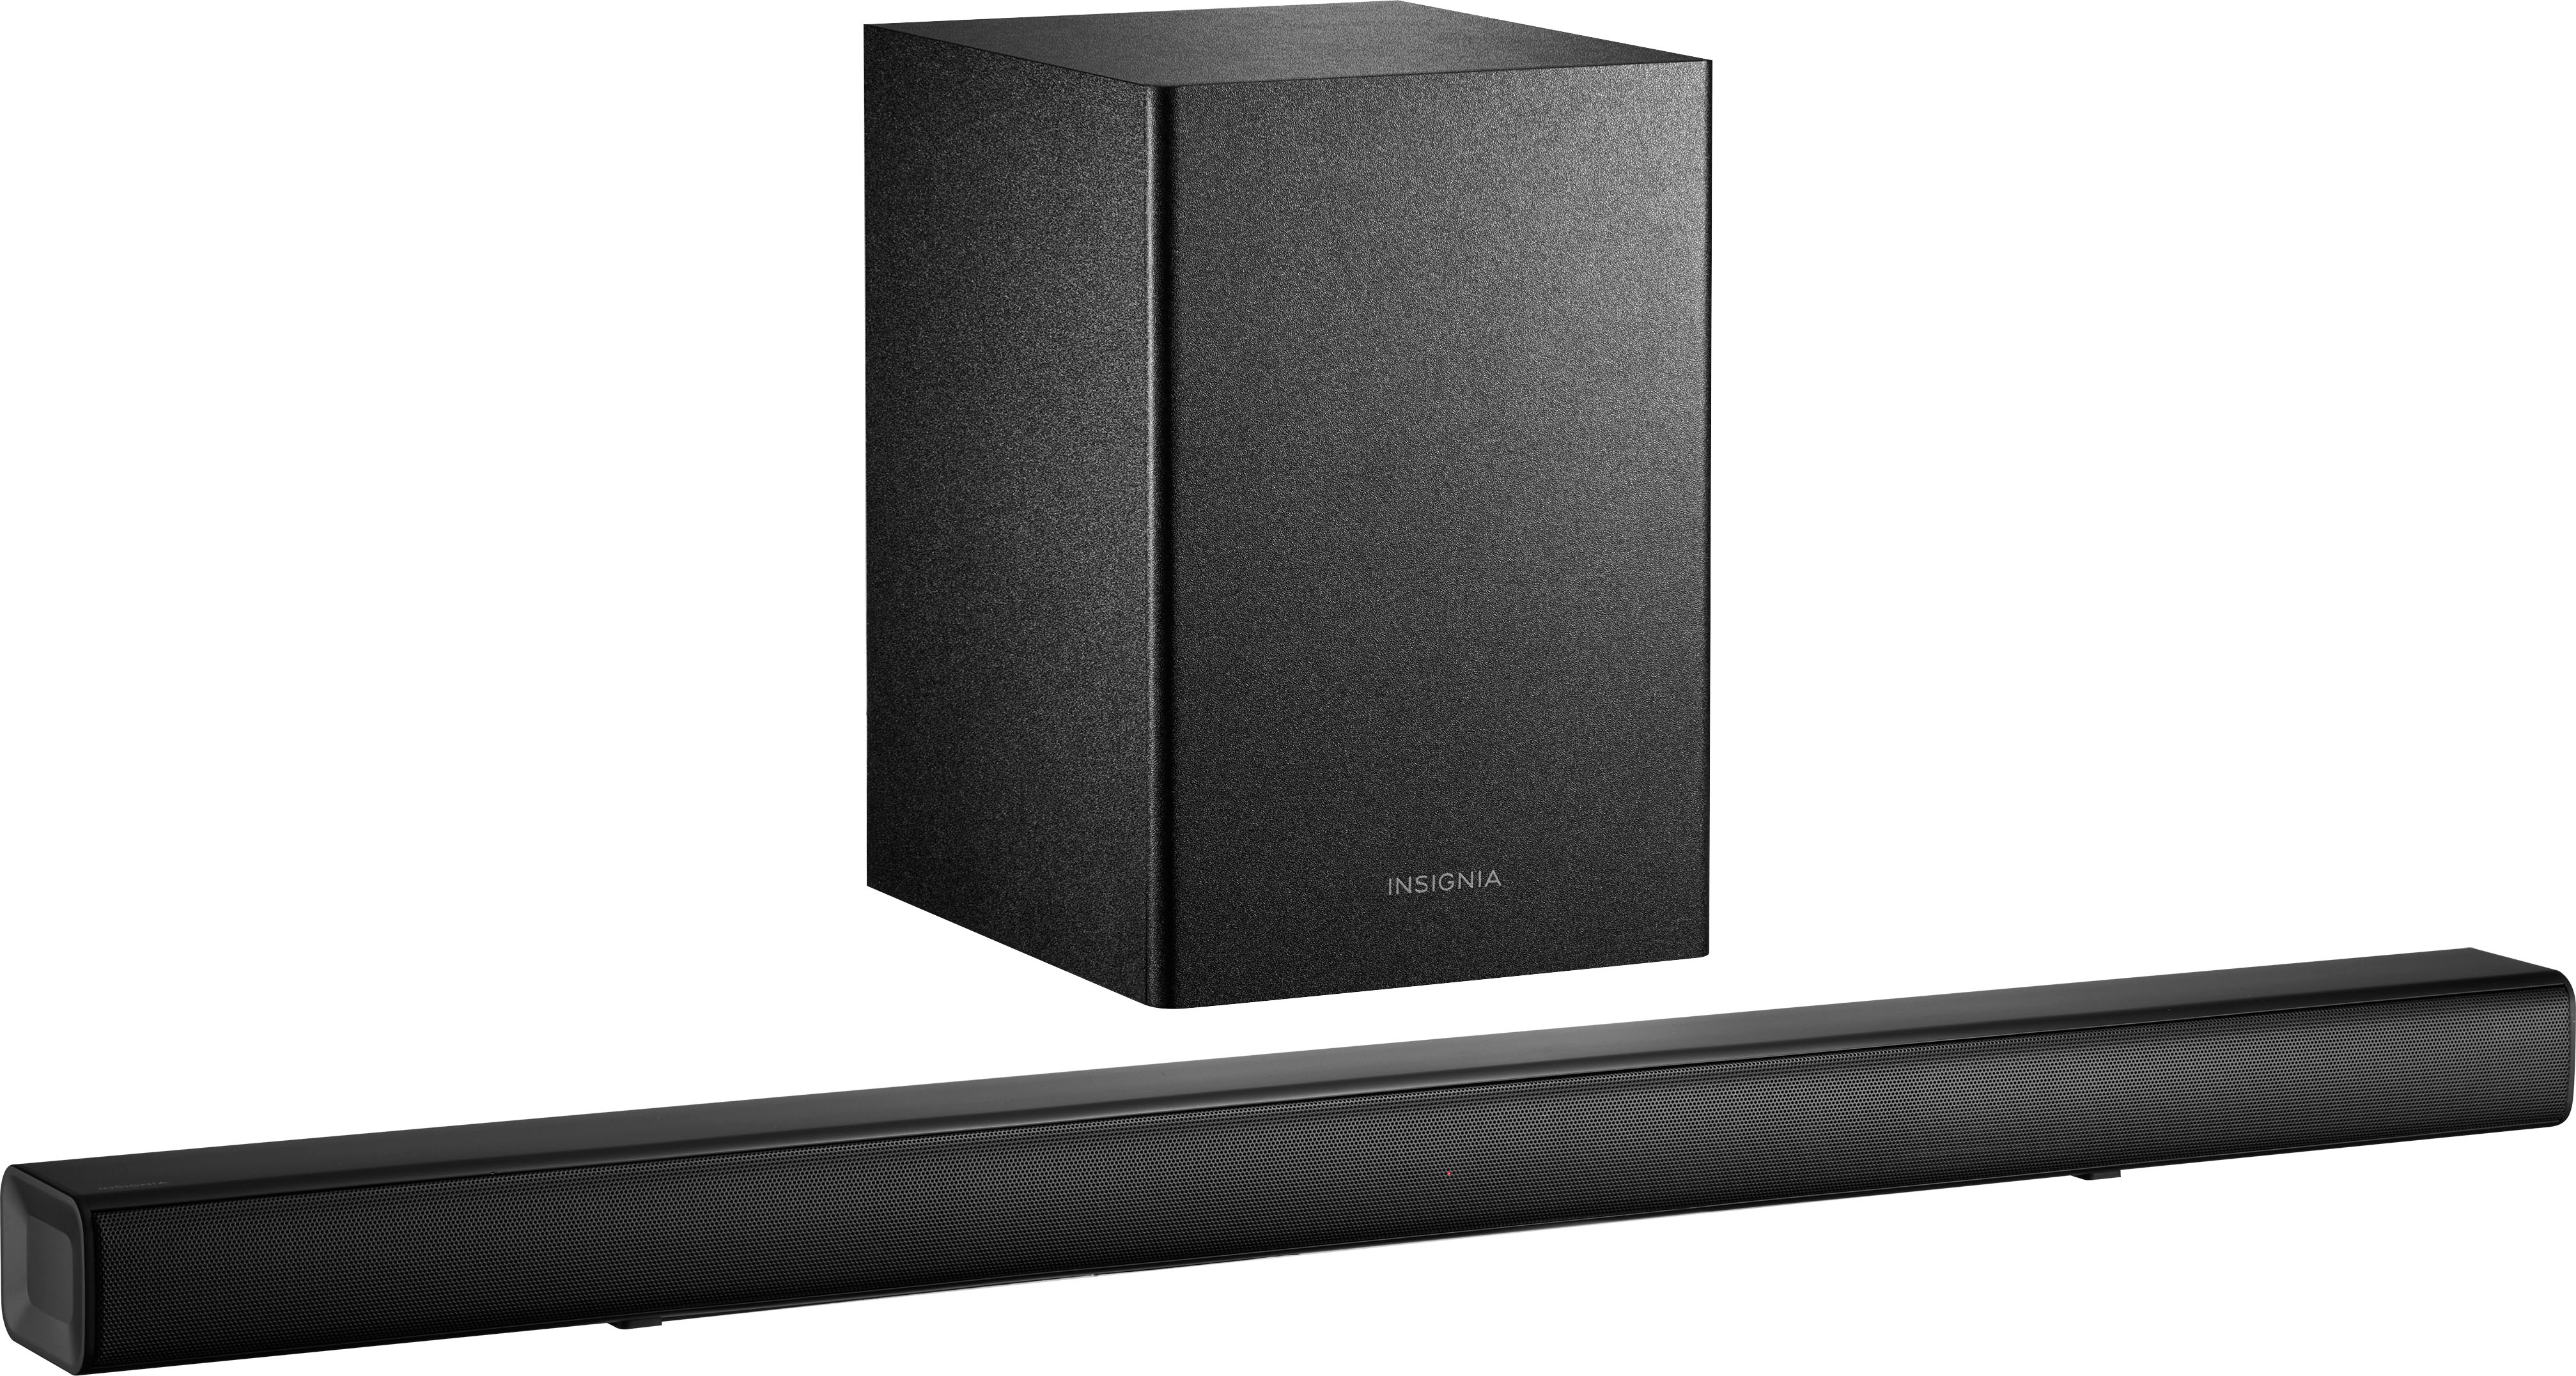 Angle View: Sony - HT-S350 2.1 Channel Soundbar with Wireless Subwoofer and Dolby Digital - Black